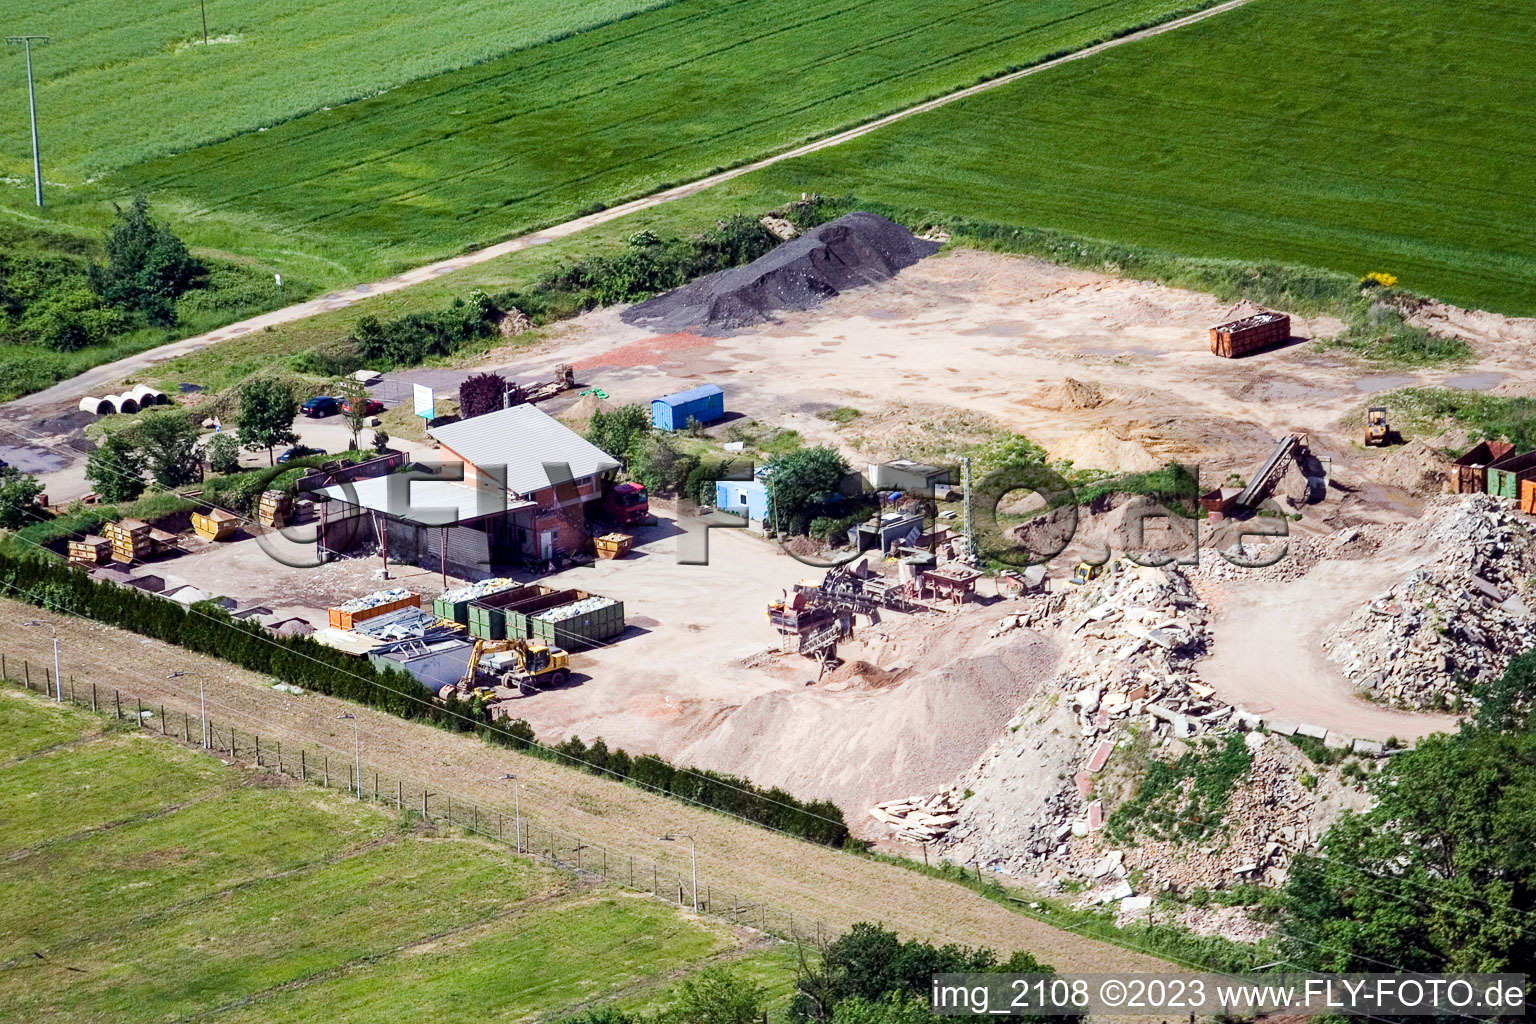 Construction waste recycling Gaudier in the district Minderslachen in Kandel in the state Rhineland-Palatinate, Germany